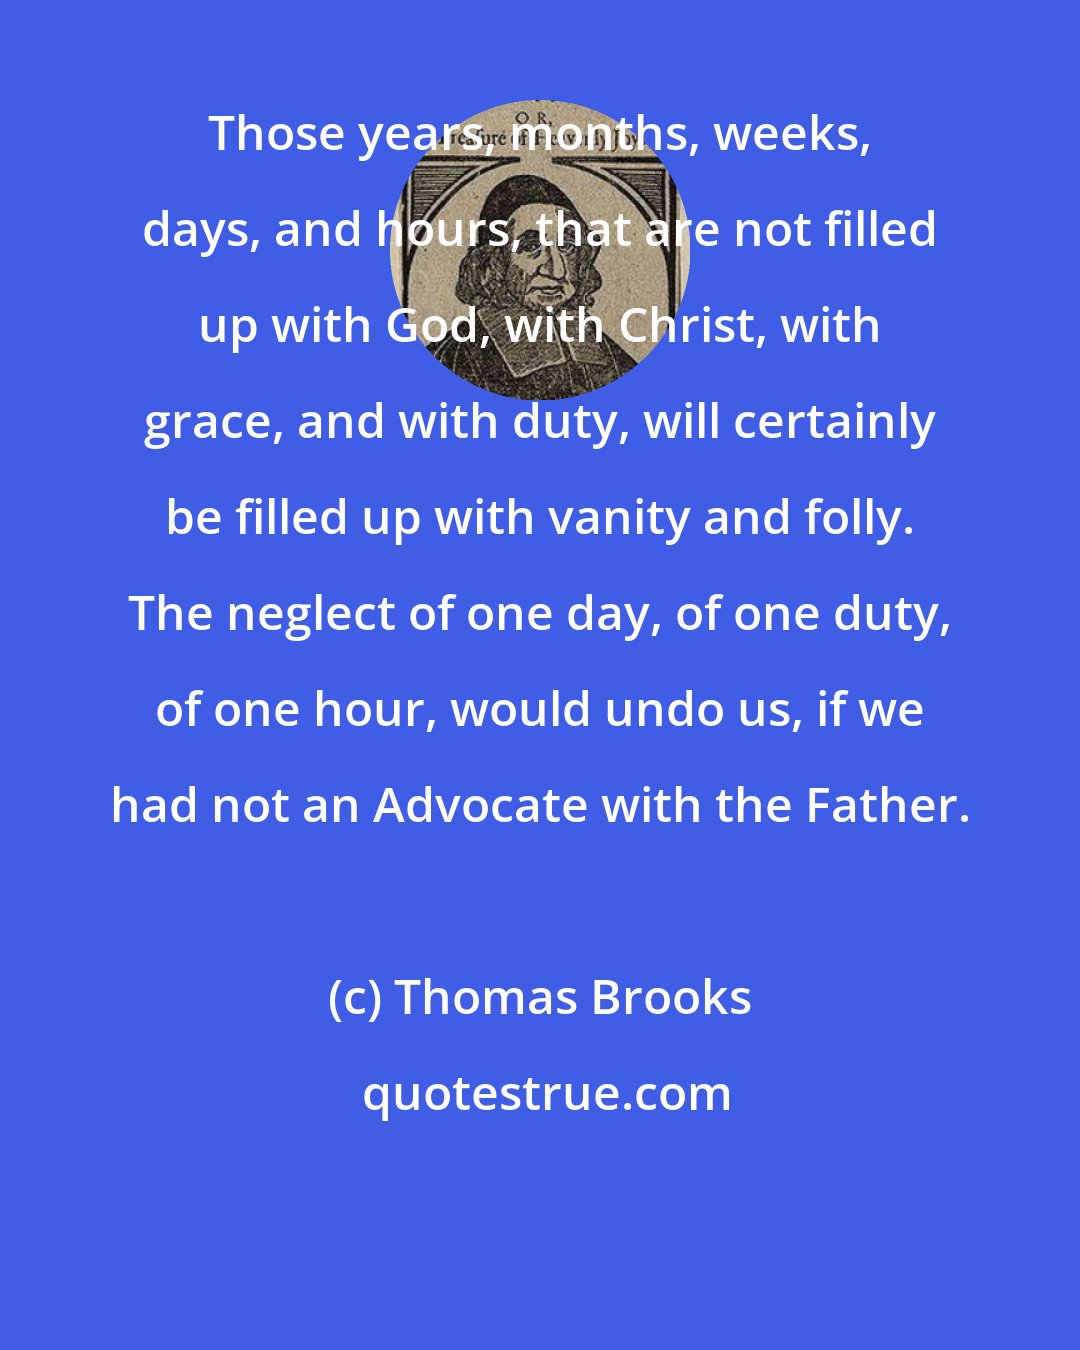 Thomas Brooks: Those years, months, weeks, days, and hours, that are not filled up with God, with Christ, with grace, and with duty, will certainly be filled up with vanity and folly. The neglect of one day, of one duty, of one hour, would undo us, if we had not an Advocate with the Father.